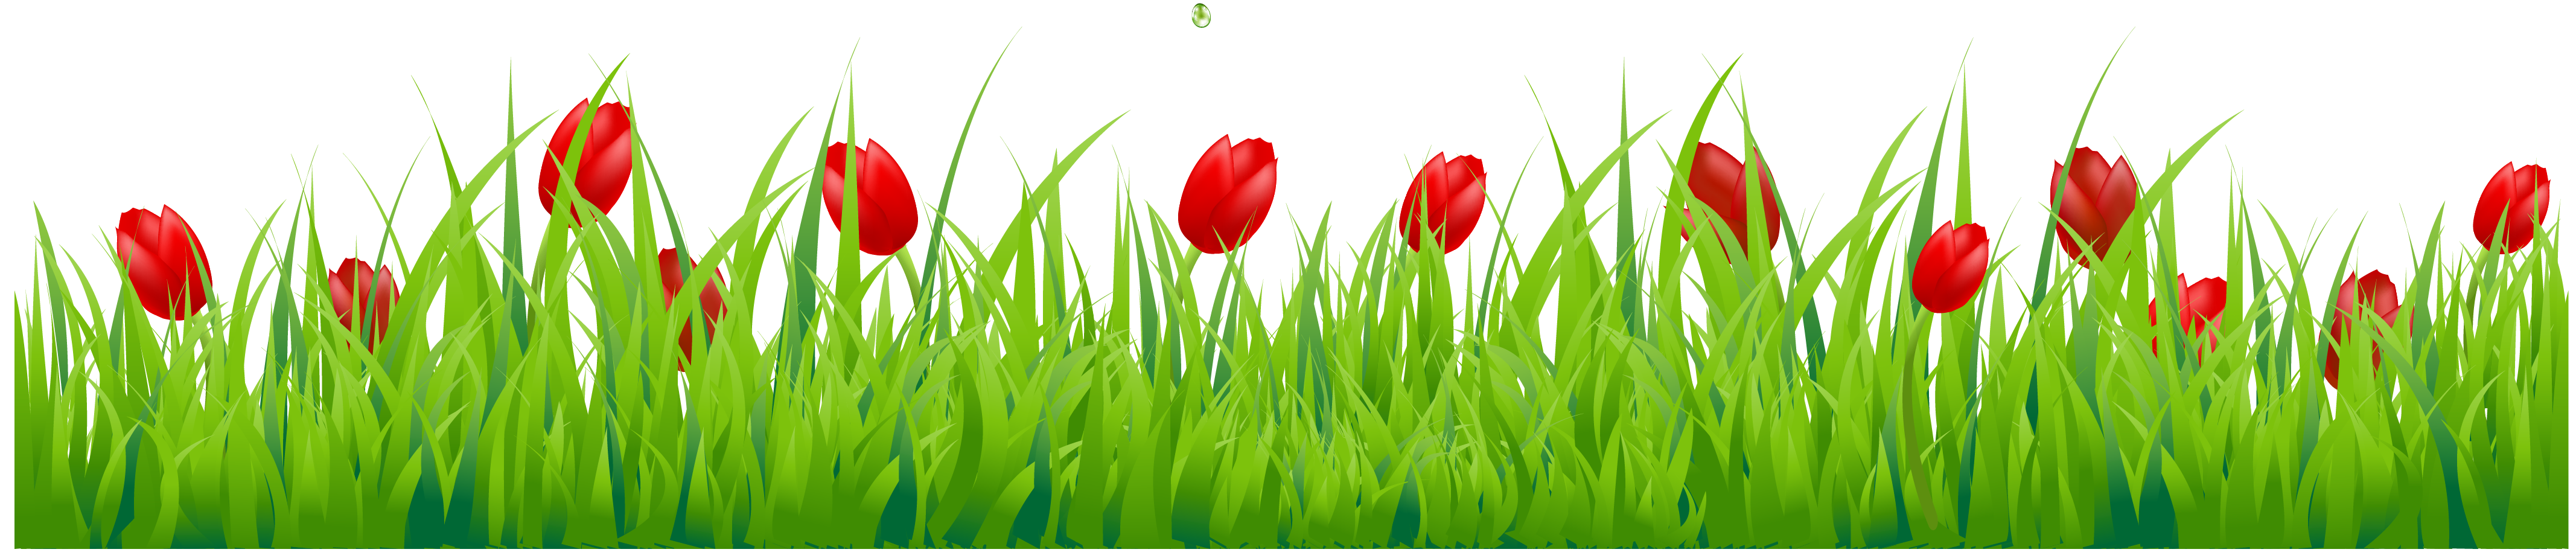 Grass clipart template. With red tulips vector